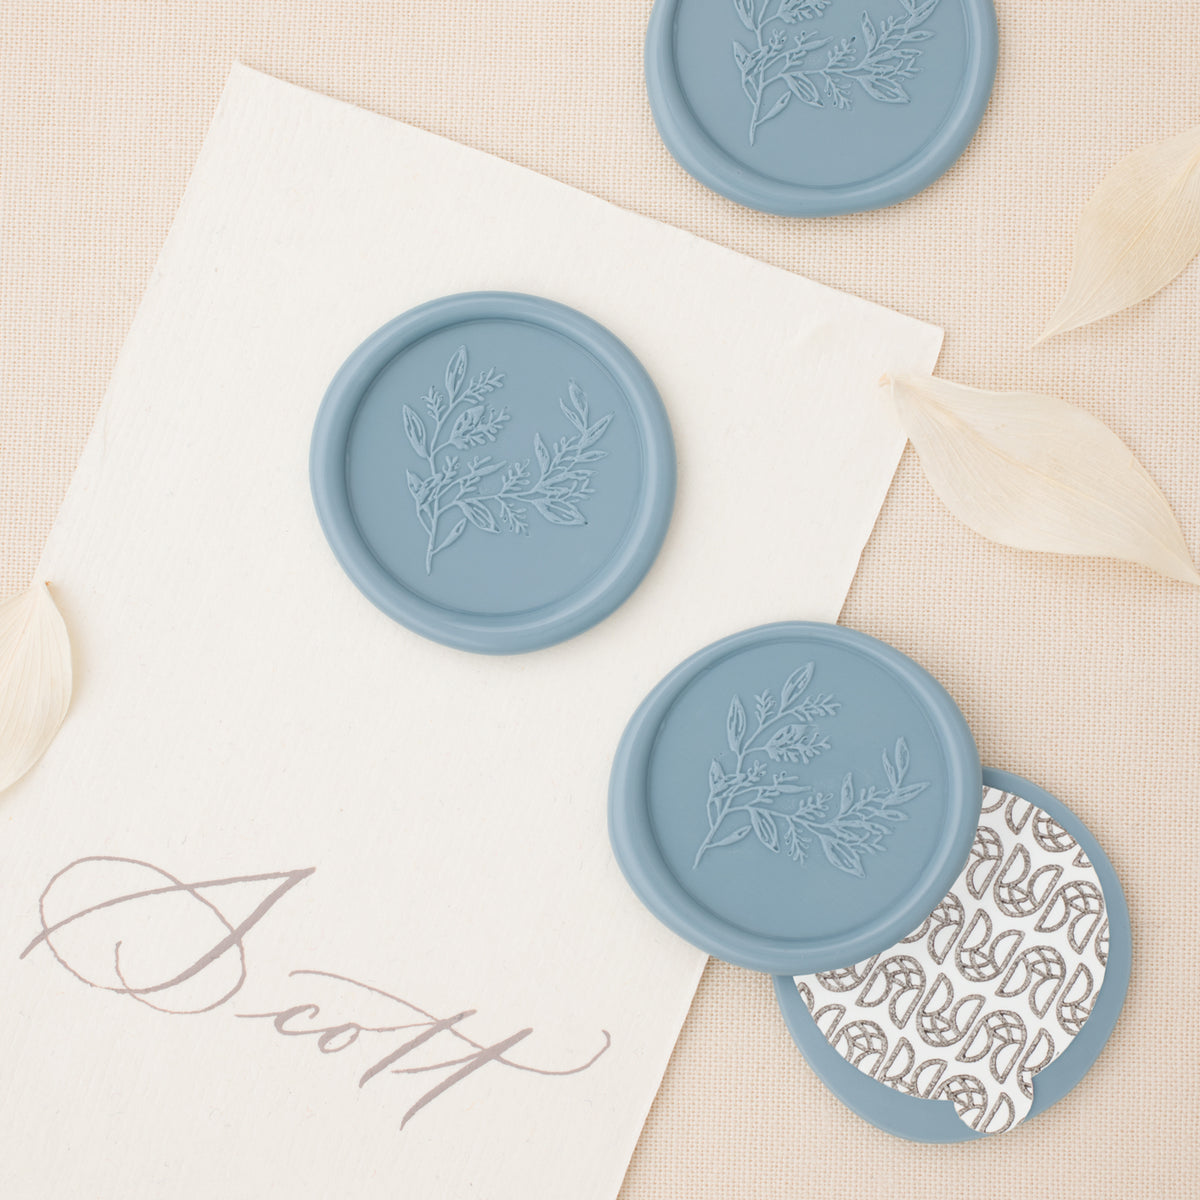  Qilery 50 Pieces Baby's Breath Adhesive Wax Seal Stickers White  Dry Floral Wax Seal Sticks Backing Envelope Seals Wedding Wax Seal for  Wedding Invitations Bridal Shower Party Letter Envelope : Arts